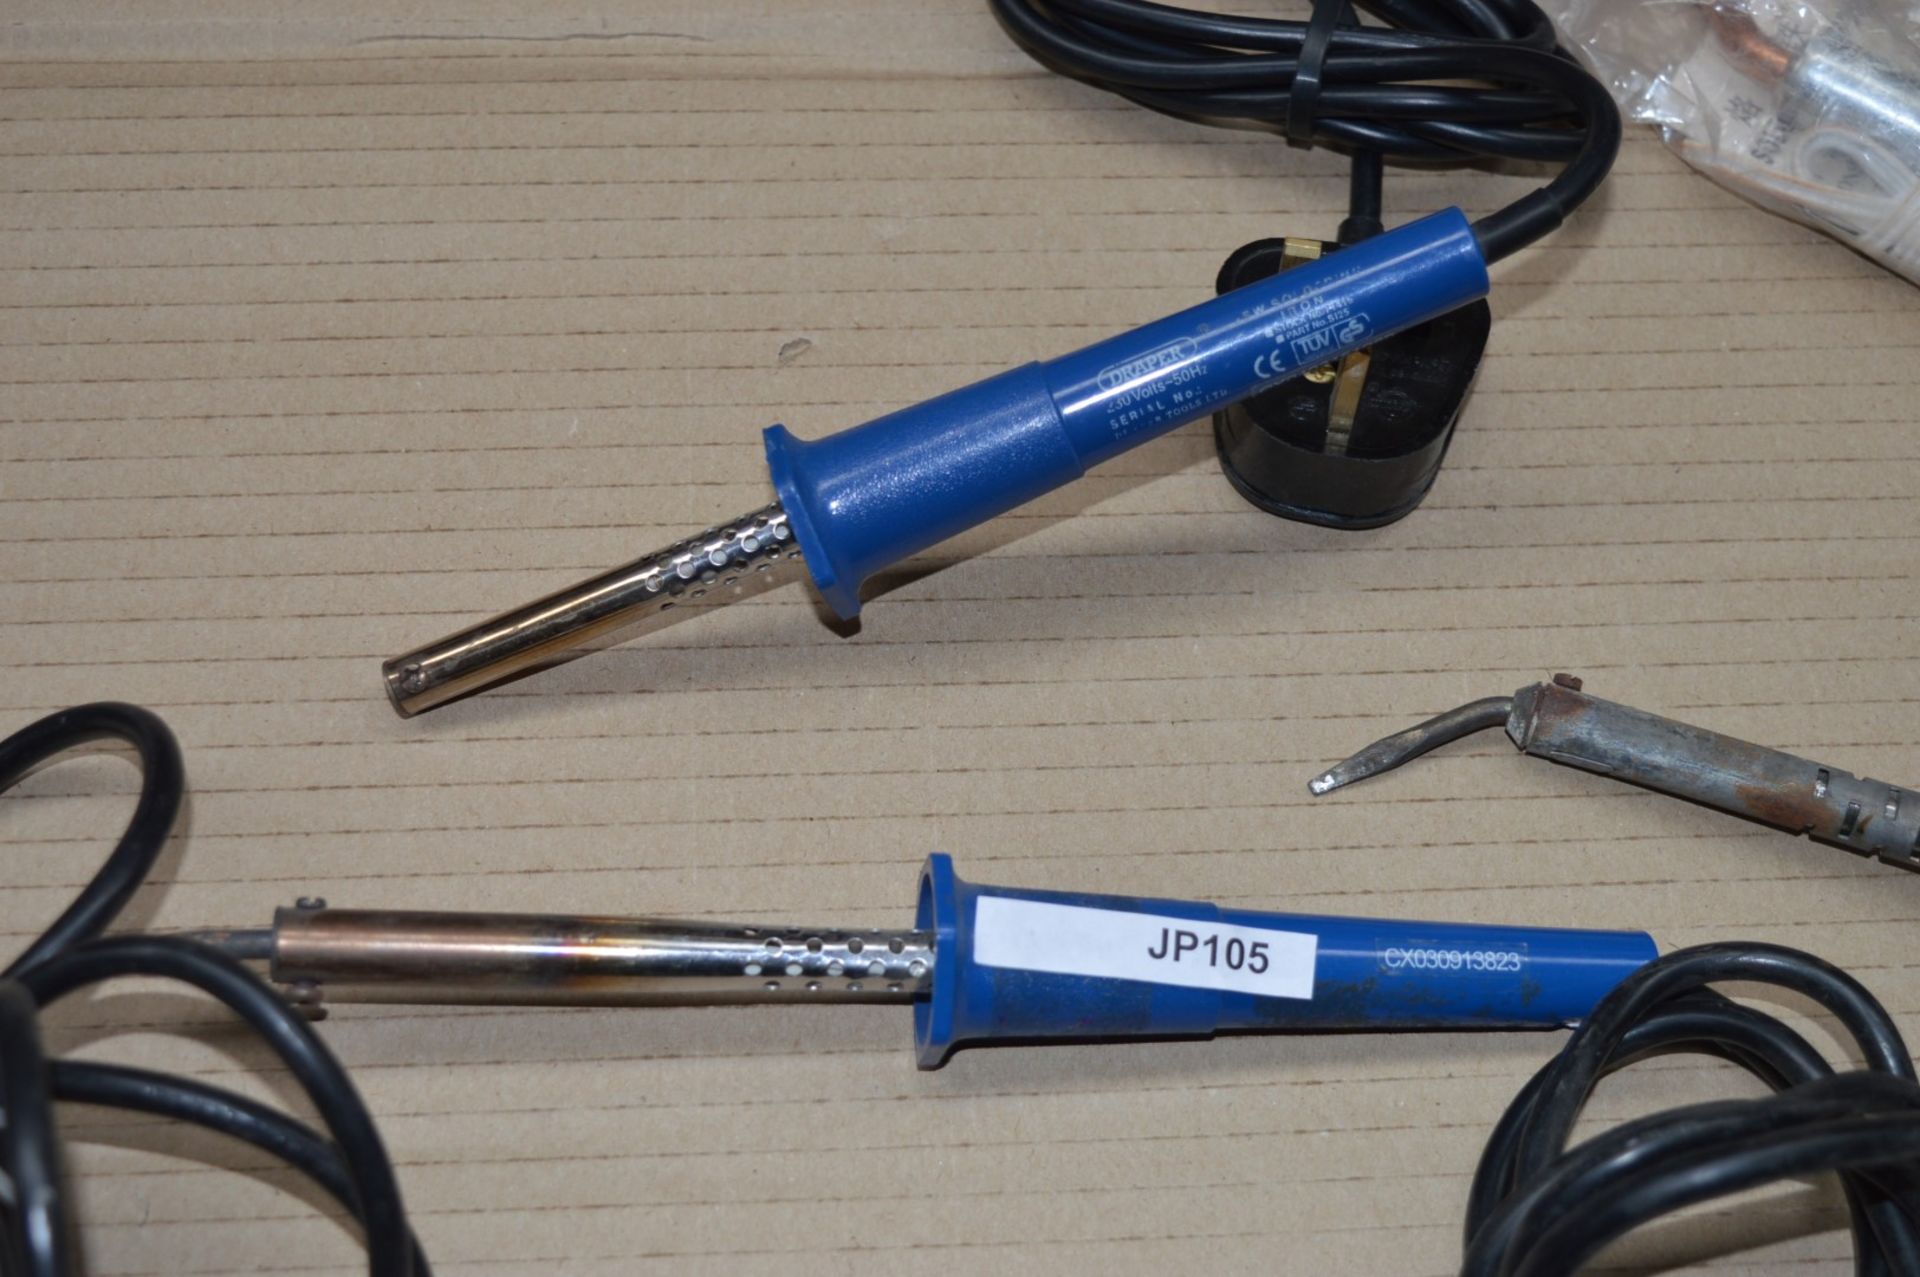 6 x Various 240v Soldering Irons - Brands Include Weller and Draper - CL300 - Ref JP105 - - Image 12 of 22